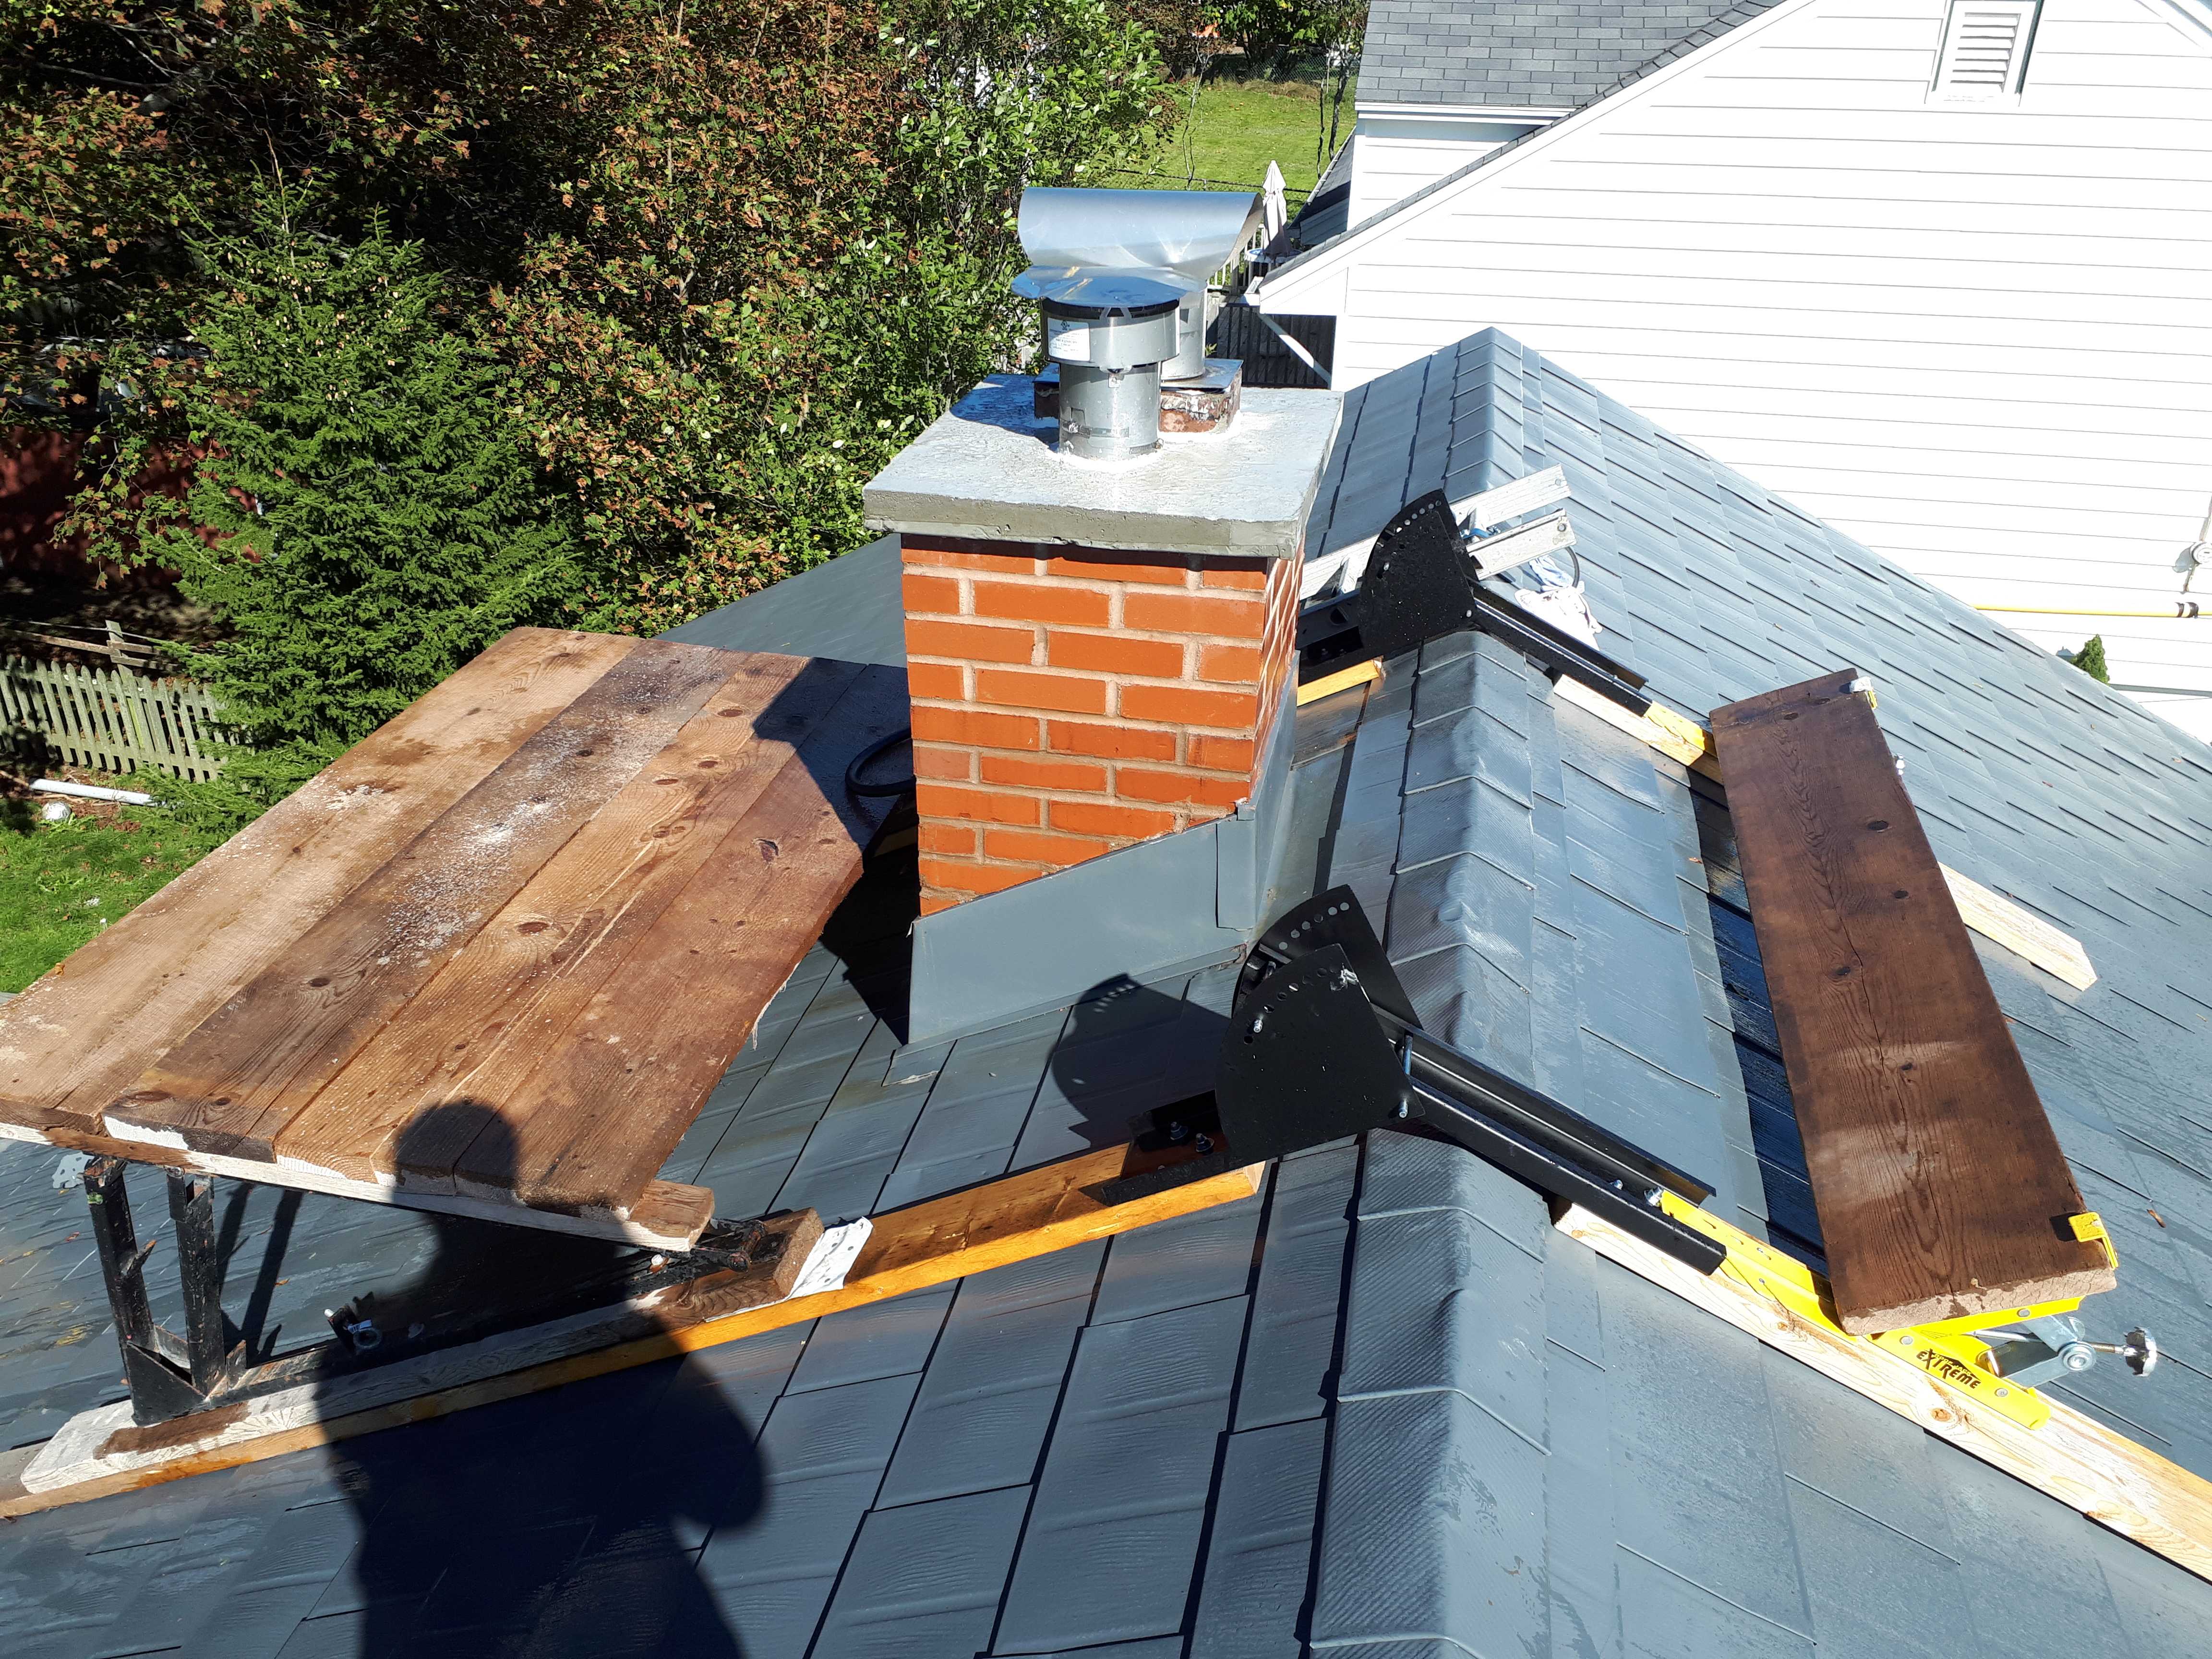 image of chimney construction-repair services completed in Halifax-Dartmouth Regional Municipality, NS by Pro Chimney Services based in Halifax, NS servicing all of the Halifax-Dartmouth Regional Municipality,Bedford, Sackville, Mount Uniacke, Windsor, Hantsport , Wolfville, Kentville, Chester, Mahone Bay, Lunenburg, Bridgewater, Liverpool, Fall River, Wellington, Enfield, Elmsdale, Brookfield, Truro, Musquodoboit Harbour & surrounding areas.